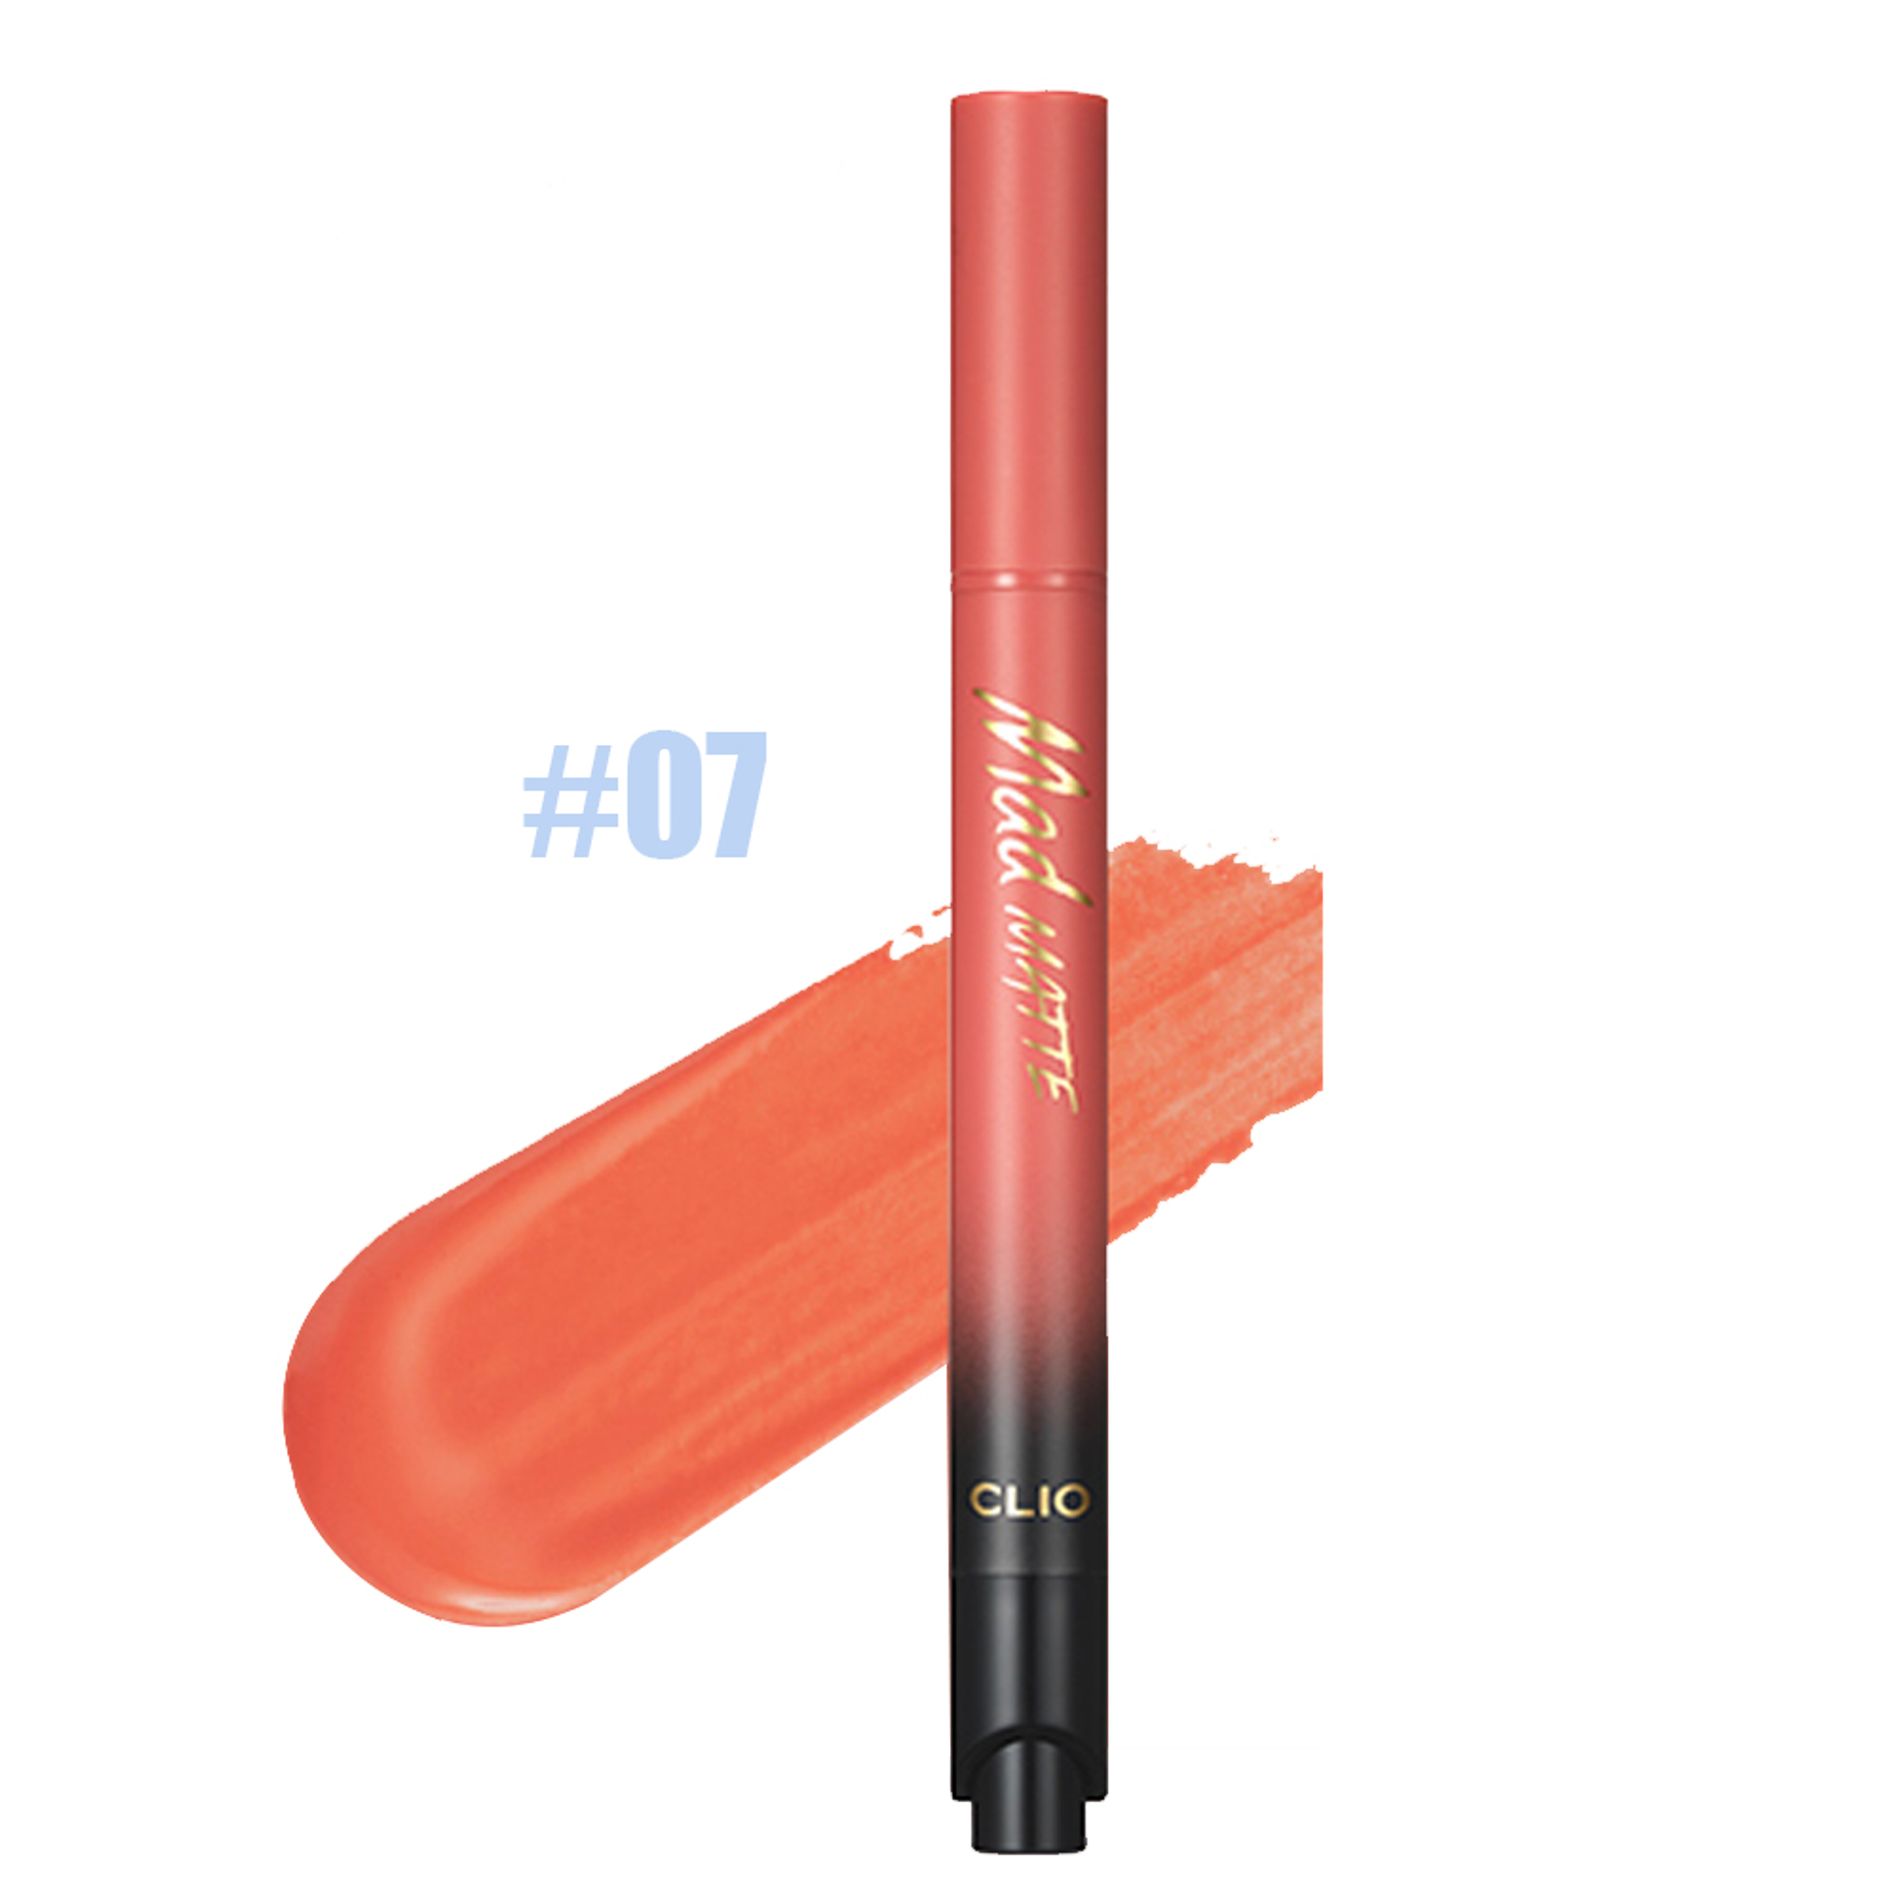 son-nuoc-dang-bam-clio-mad-matte-stain-tint-2g-22